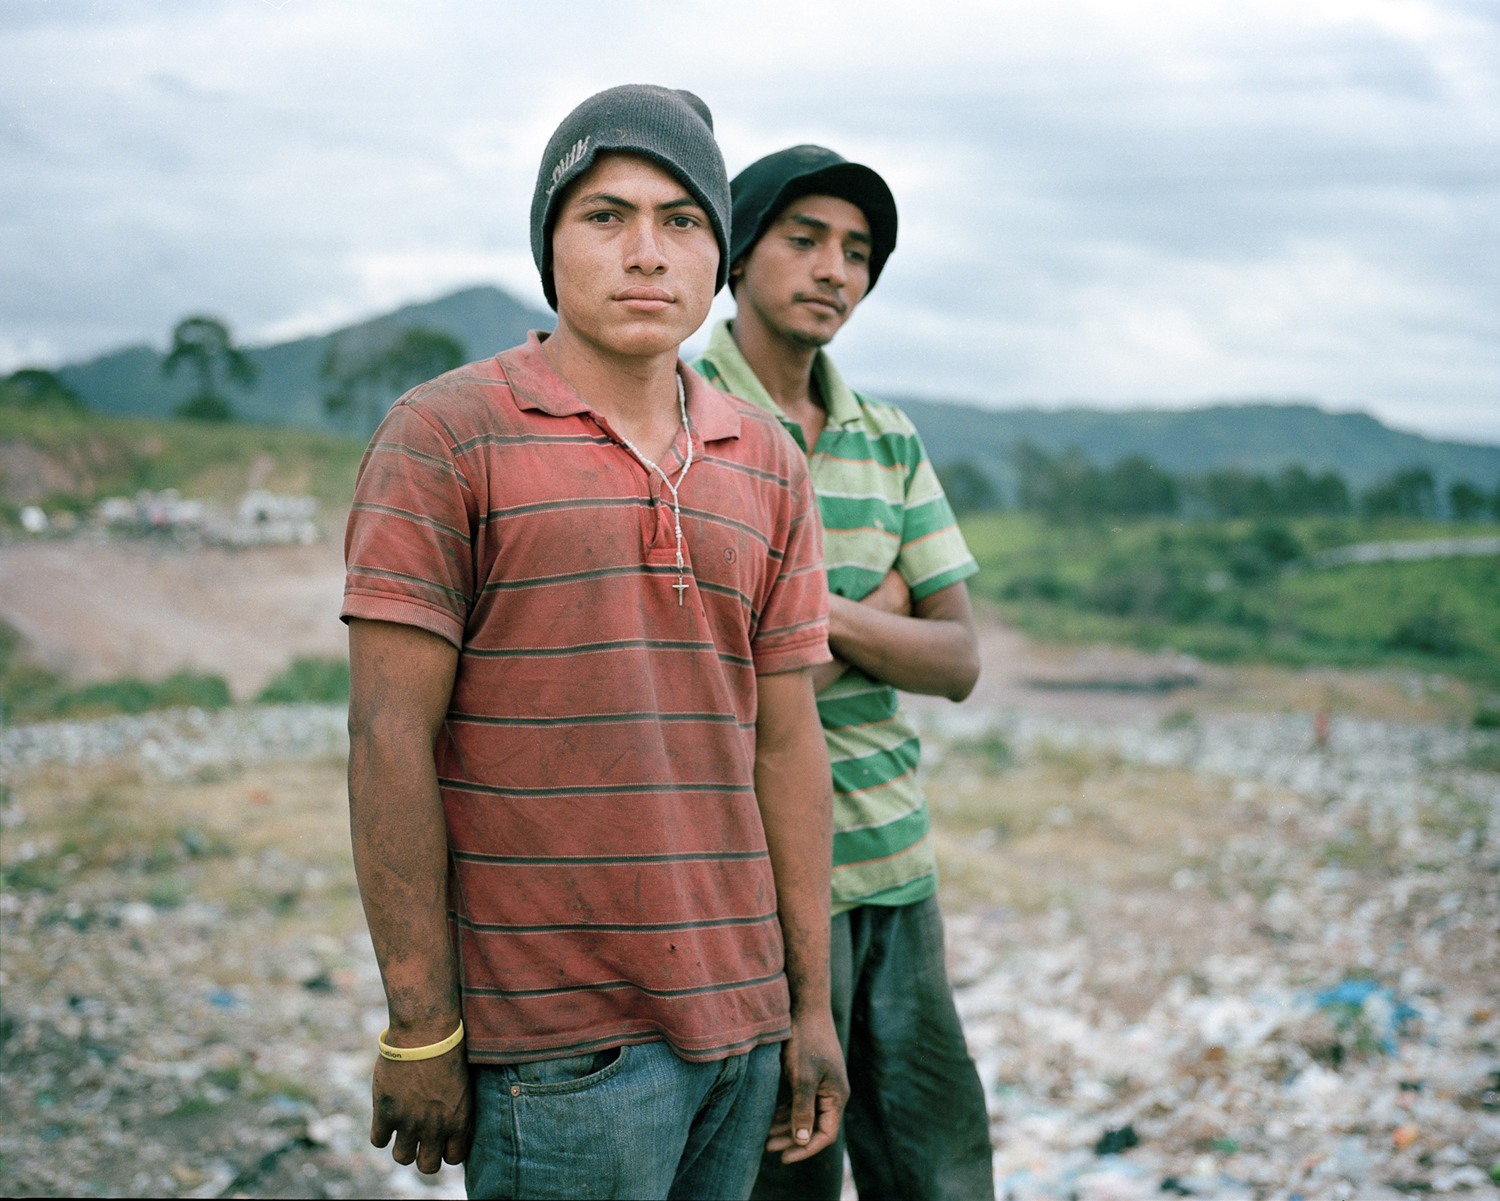  Angel and Gerson pose for a portrait in the municipal dump where they work in Tegucigalpa. 